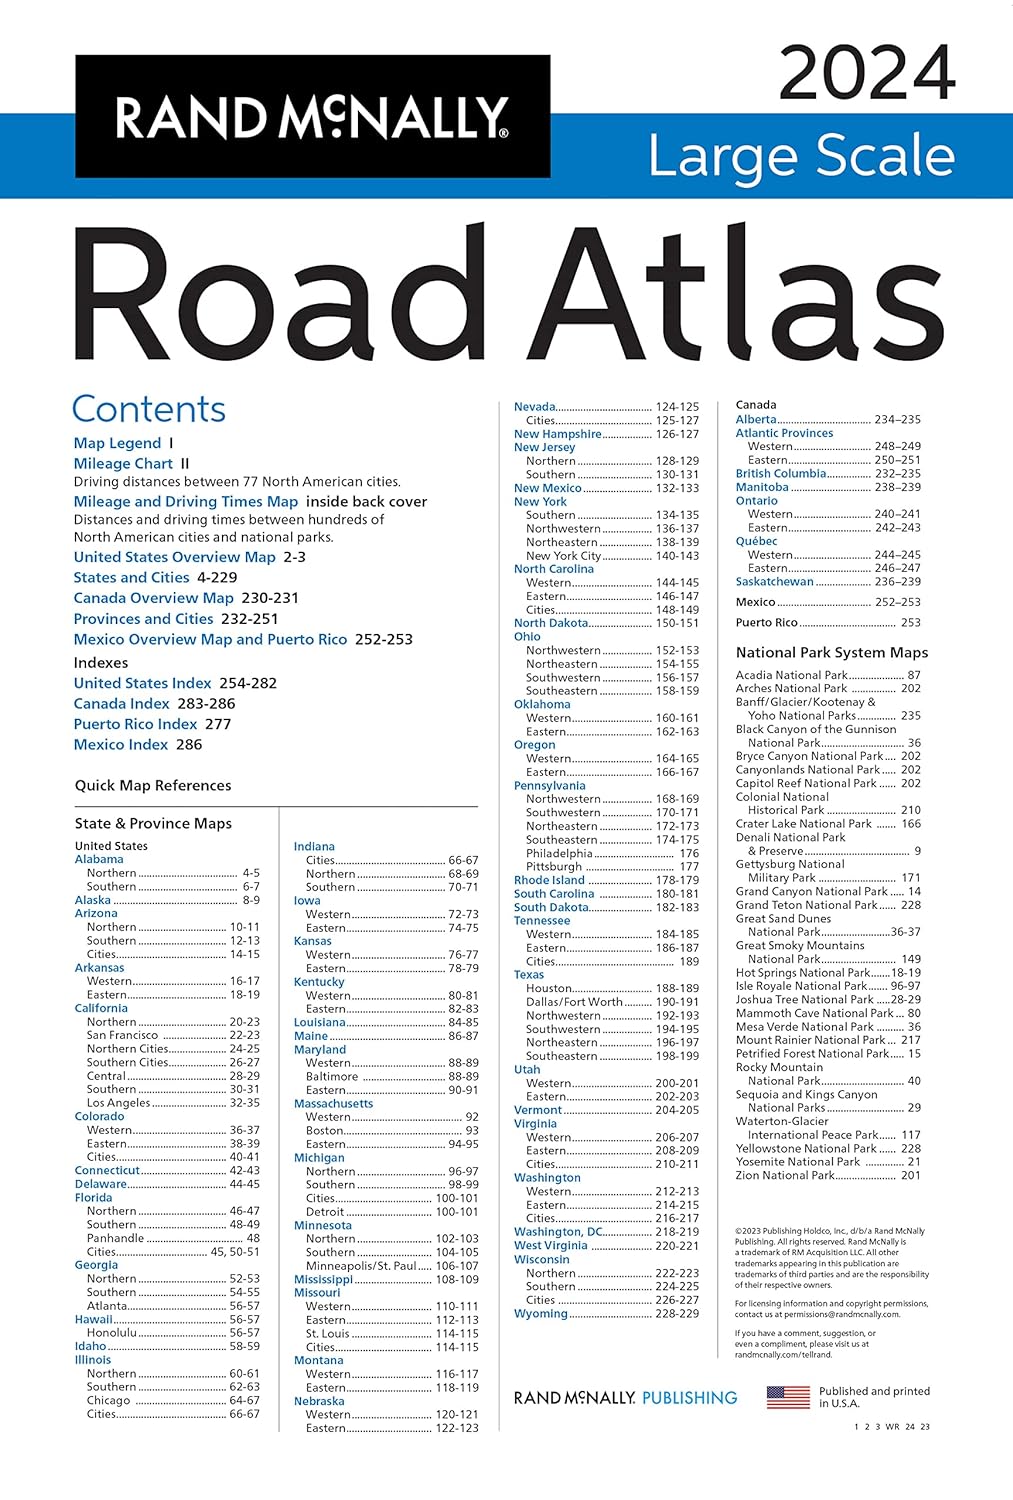 Rand McNally 2024 Large Scale Road Atlas - 100th Anniversary Collector's Edition (The Rand McNally Large Scale Road Atlas)